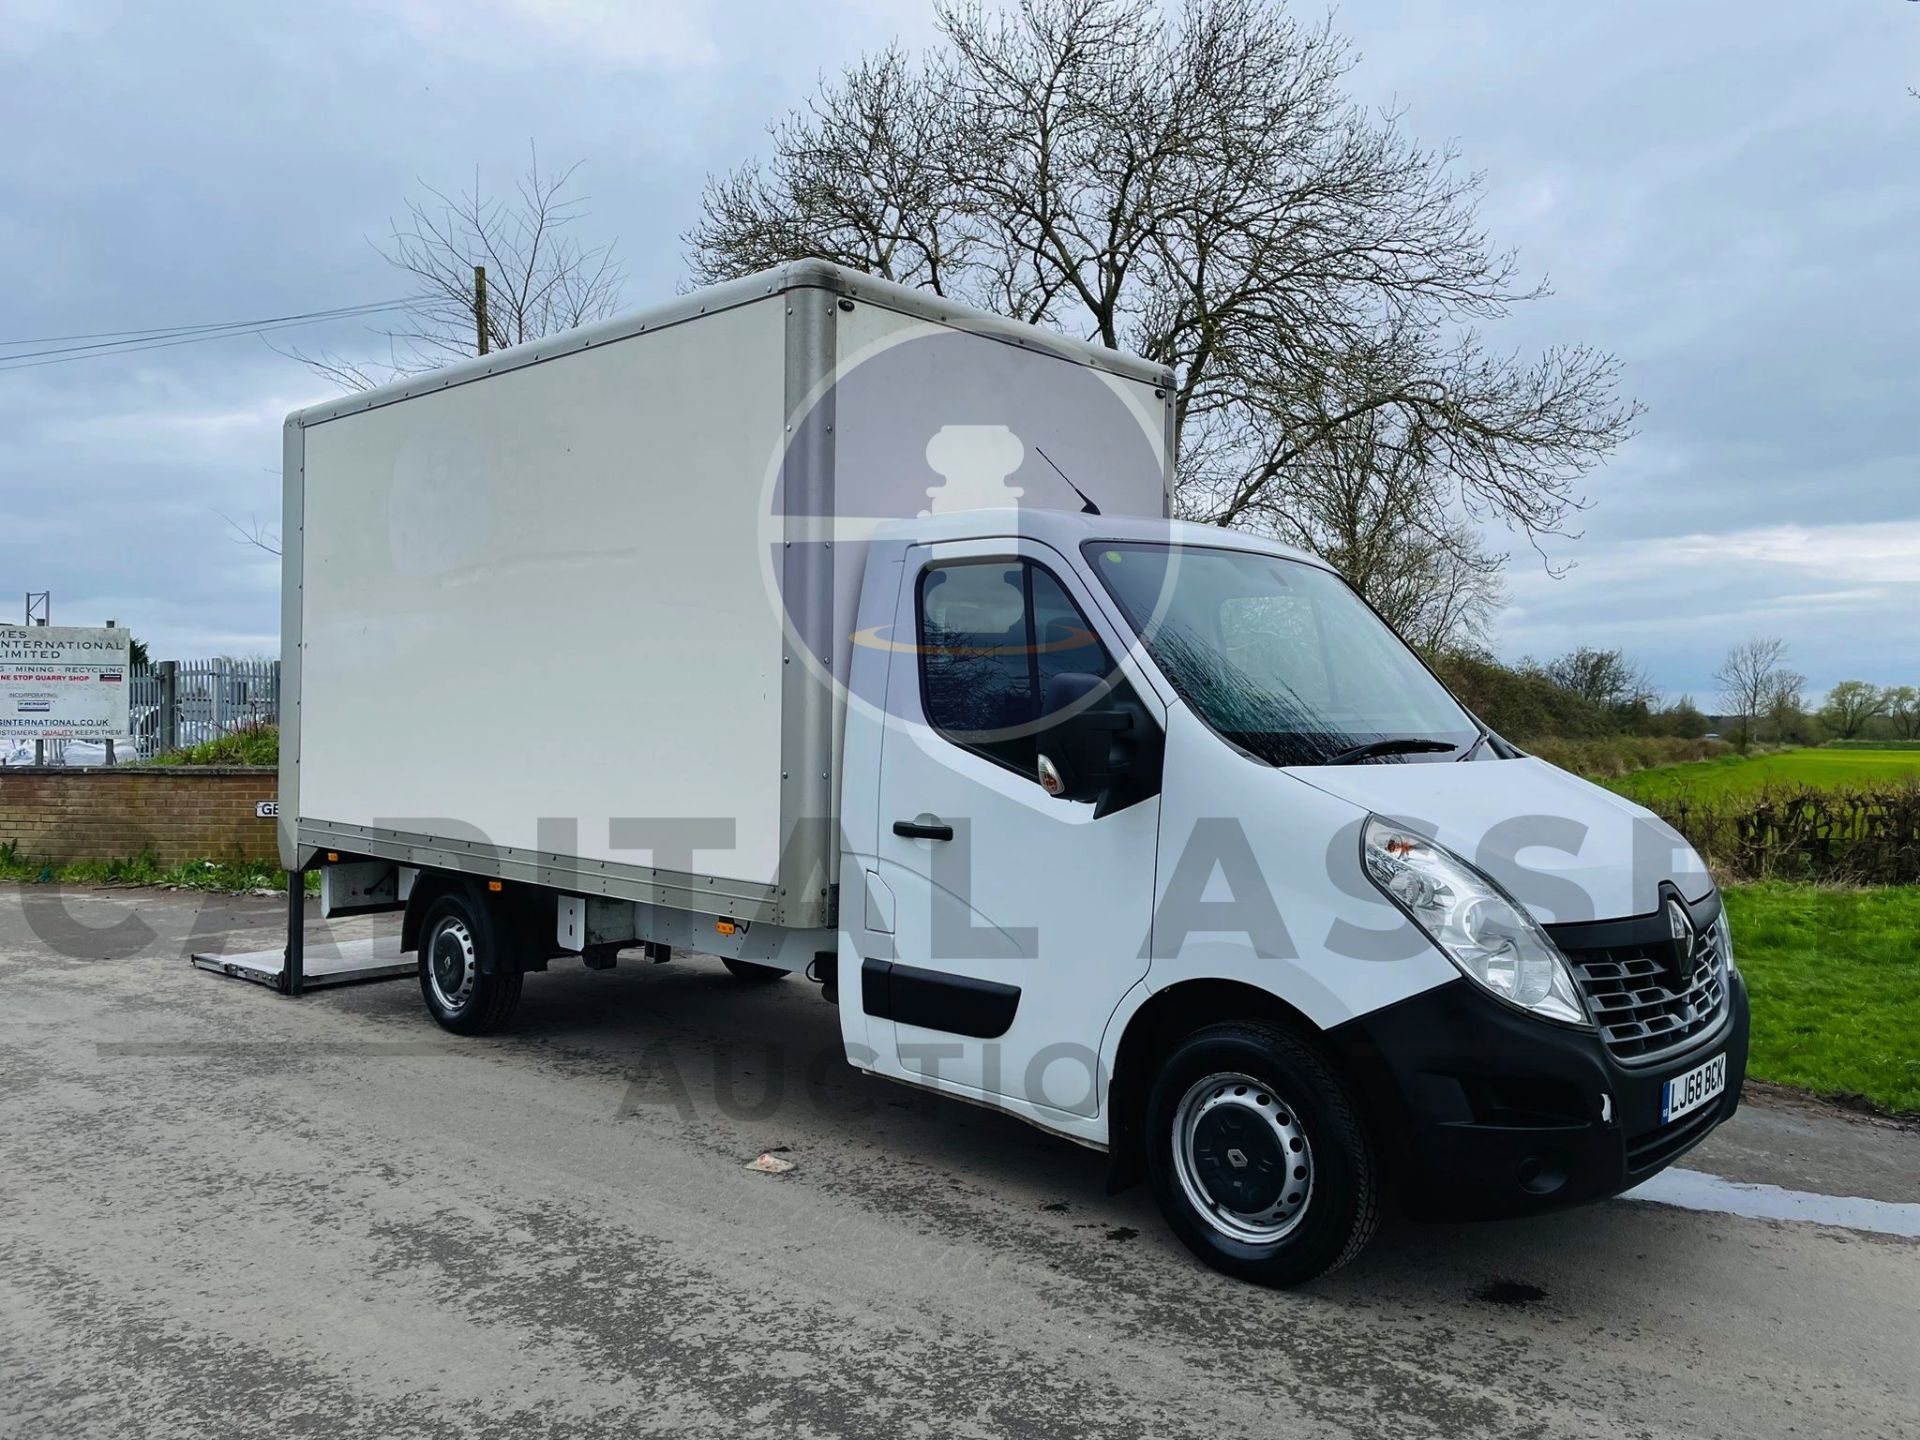 RENAULT MASTER 2.3 DCI 130 BUSINESS EDITION LWB (LUTON / BOX VAN) - 2019 MODEL - EURO 6 - TAIL LIFT! - Image 2 of 19